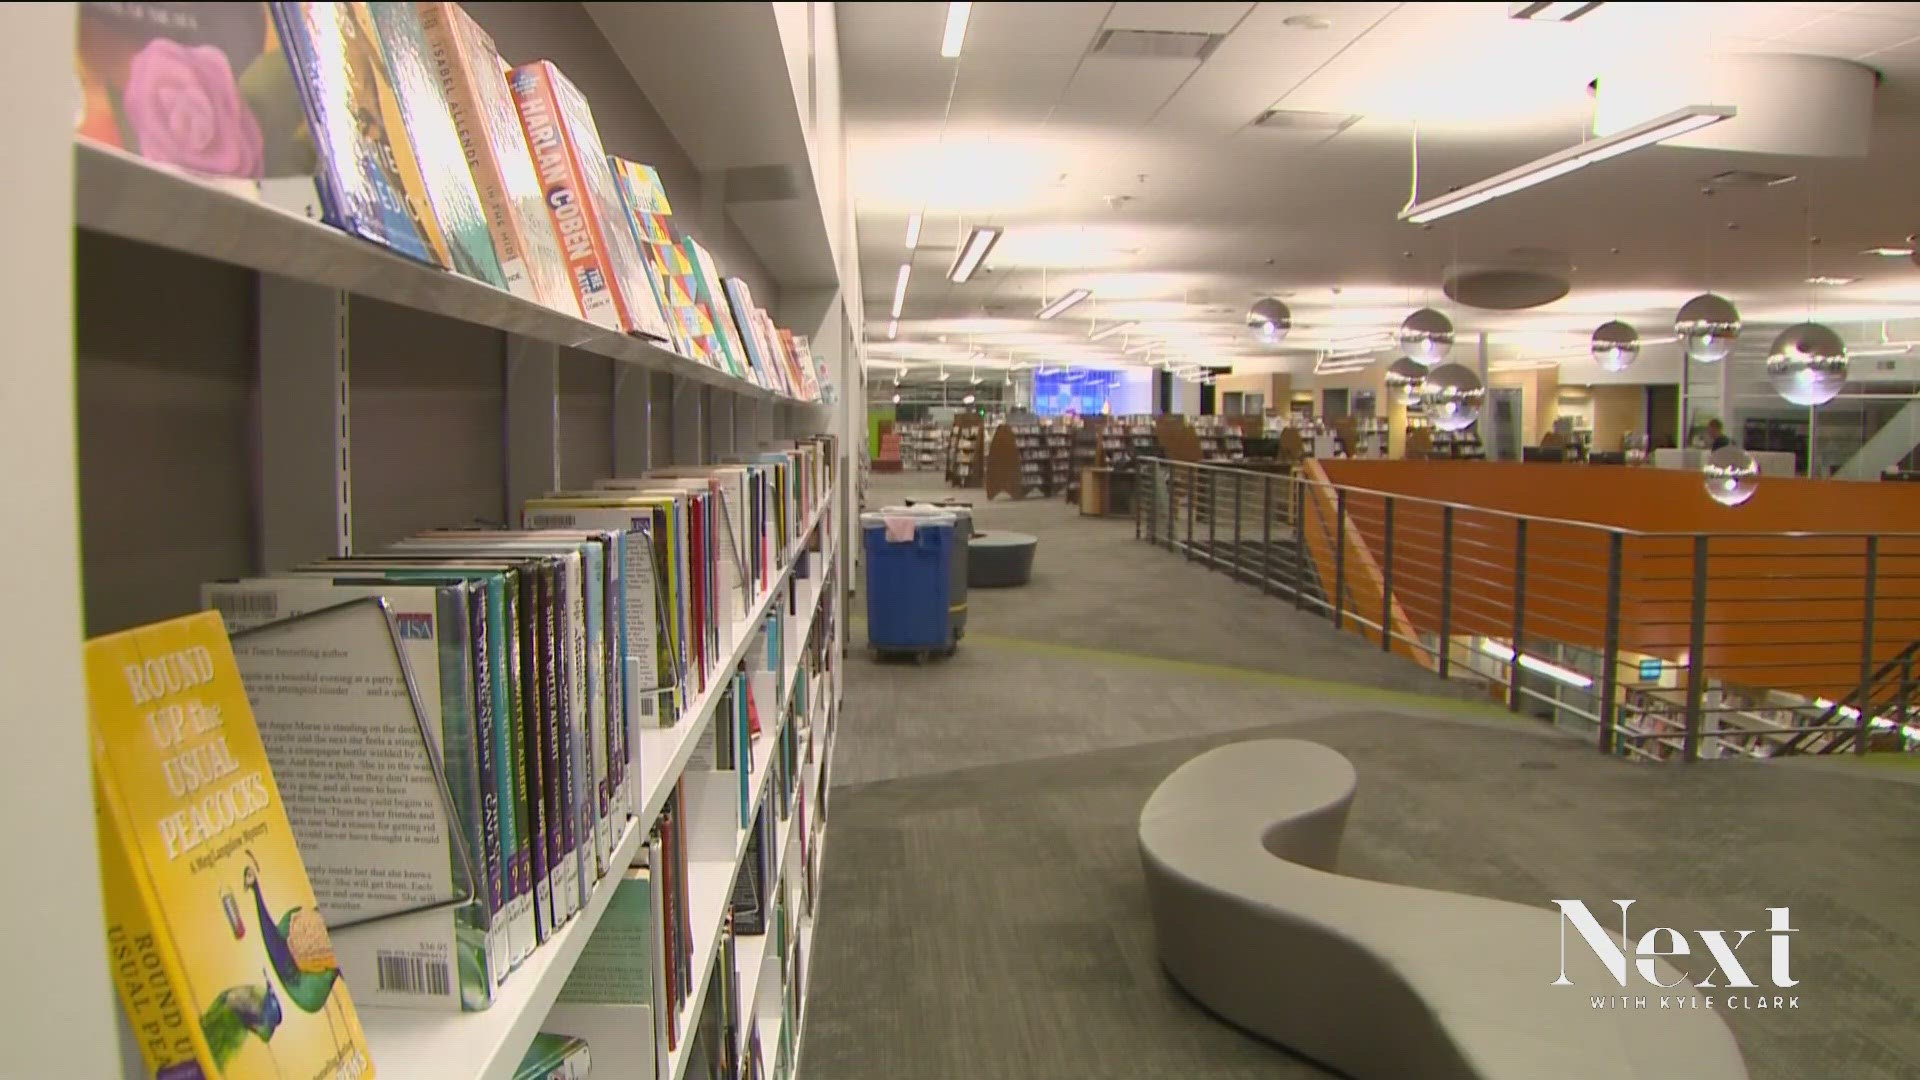 The Library Research Service says Colorado's libraries saw 120 content challenges last year. Few resulted in book bans. About 10% caused a change.